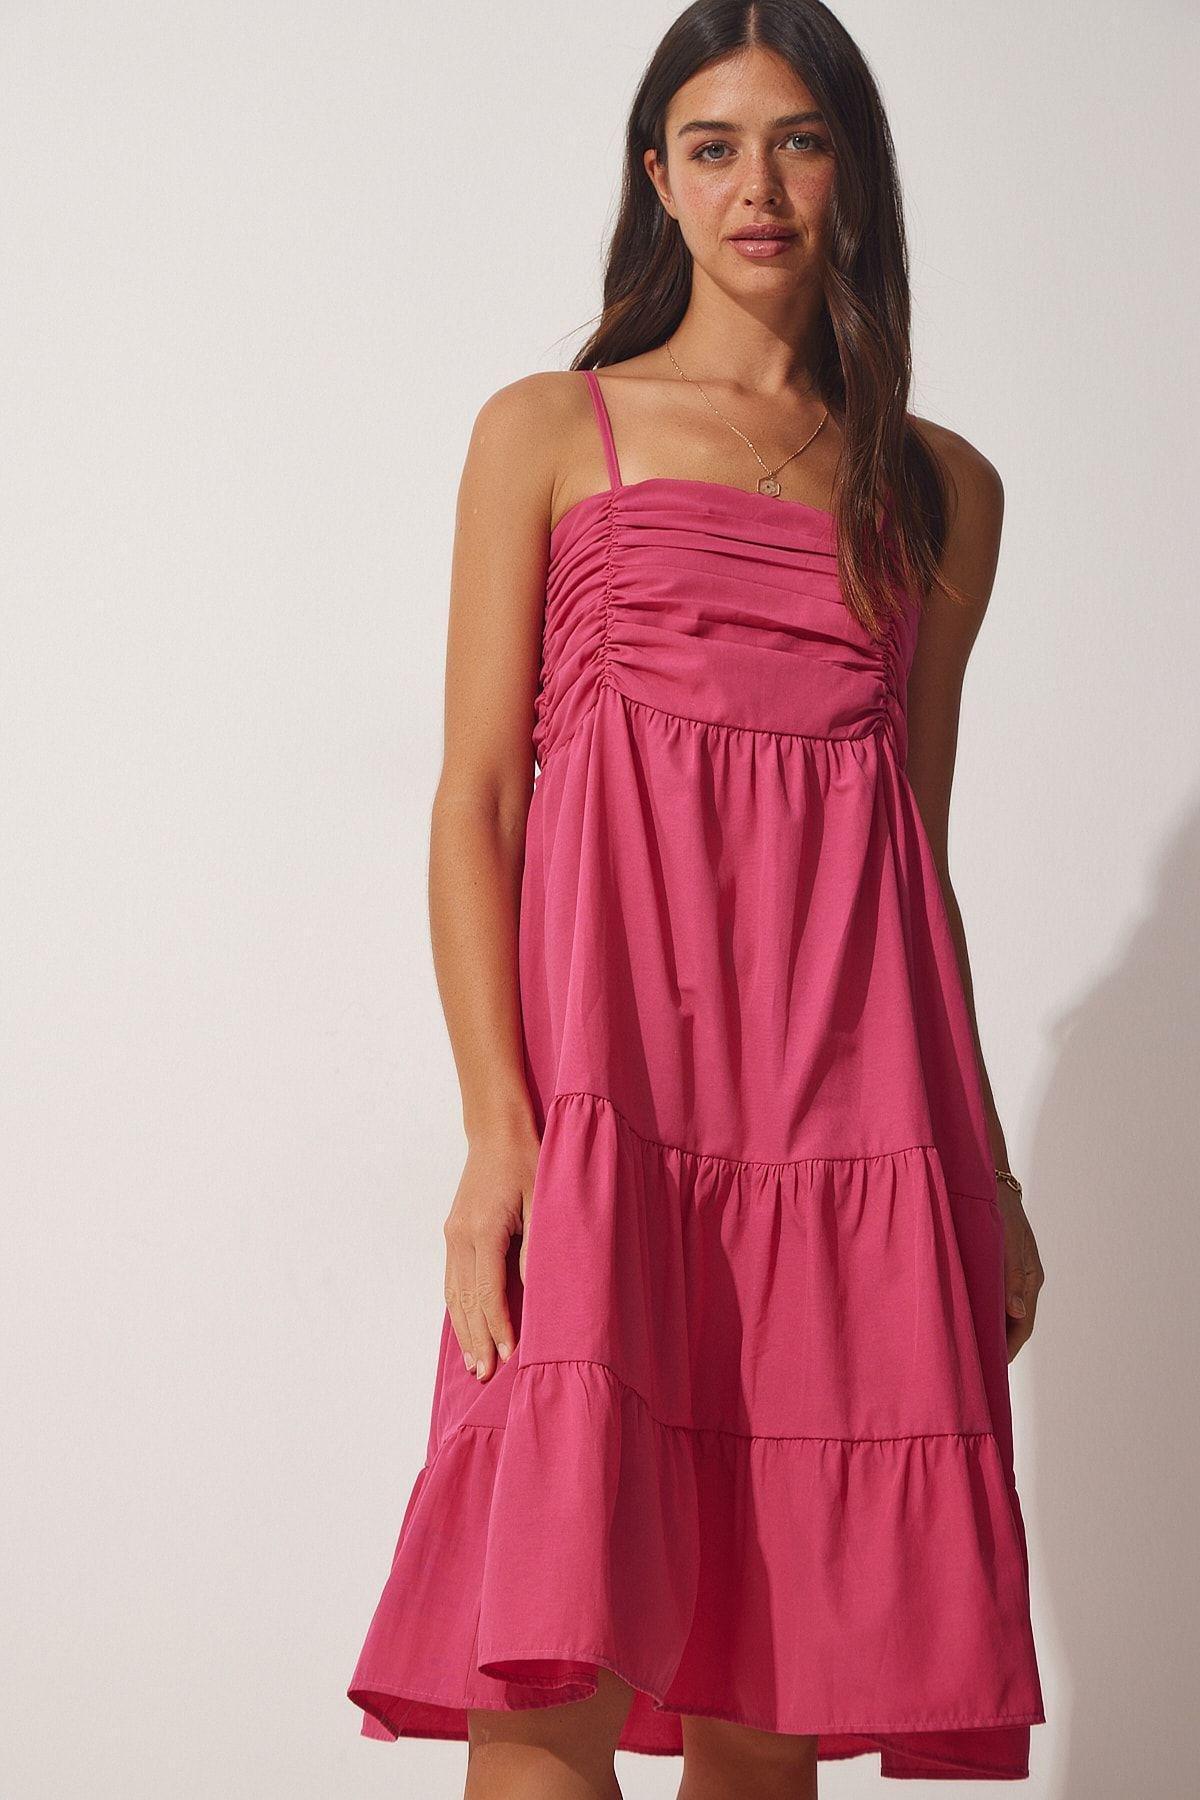 Happiness Istanbul - Pink A-Line Dress